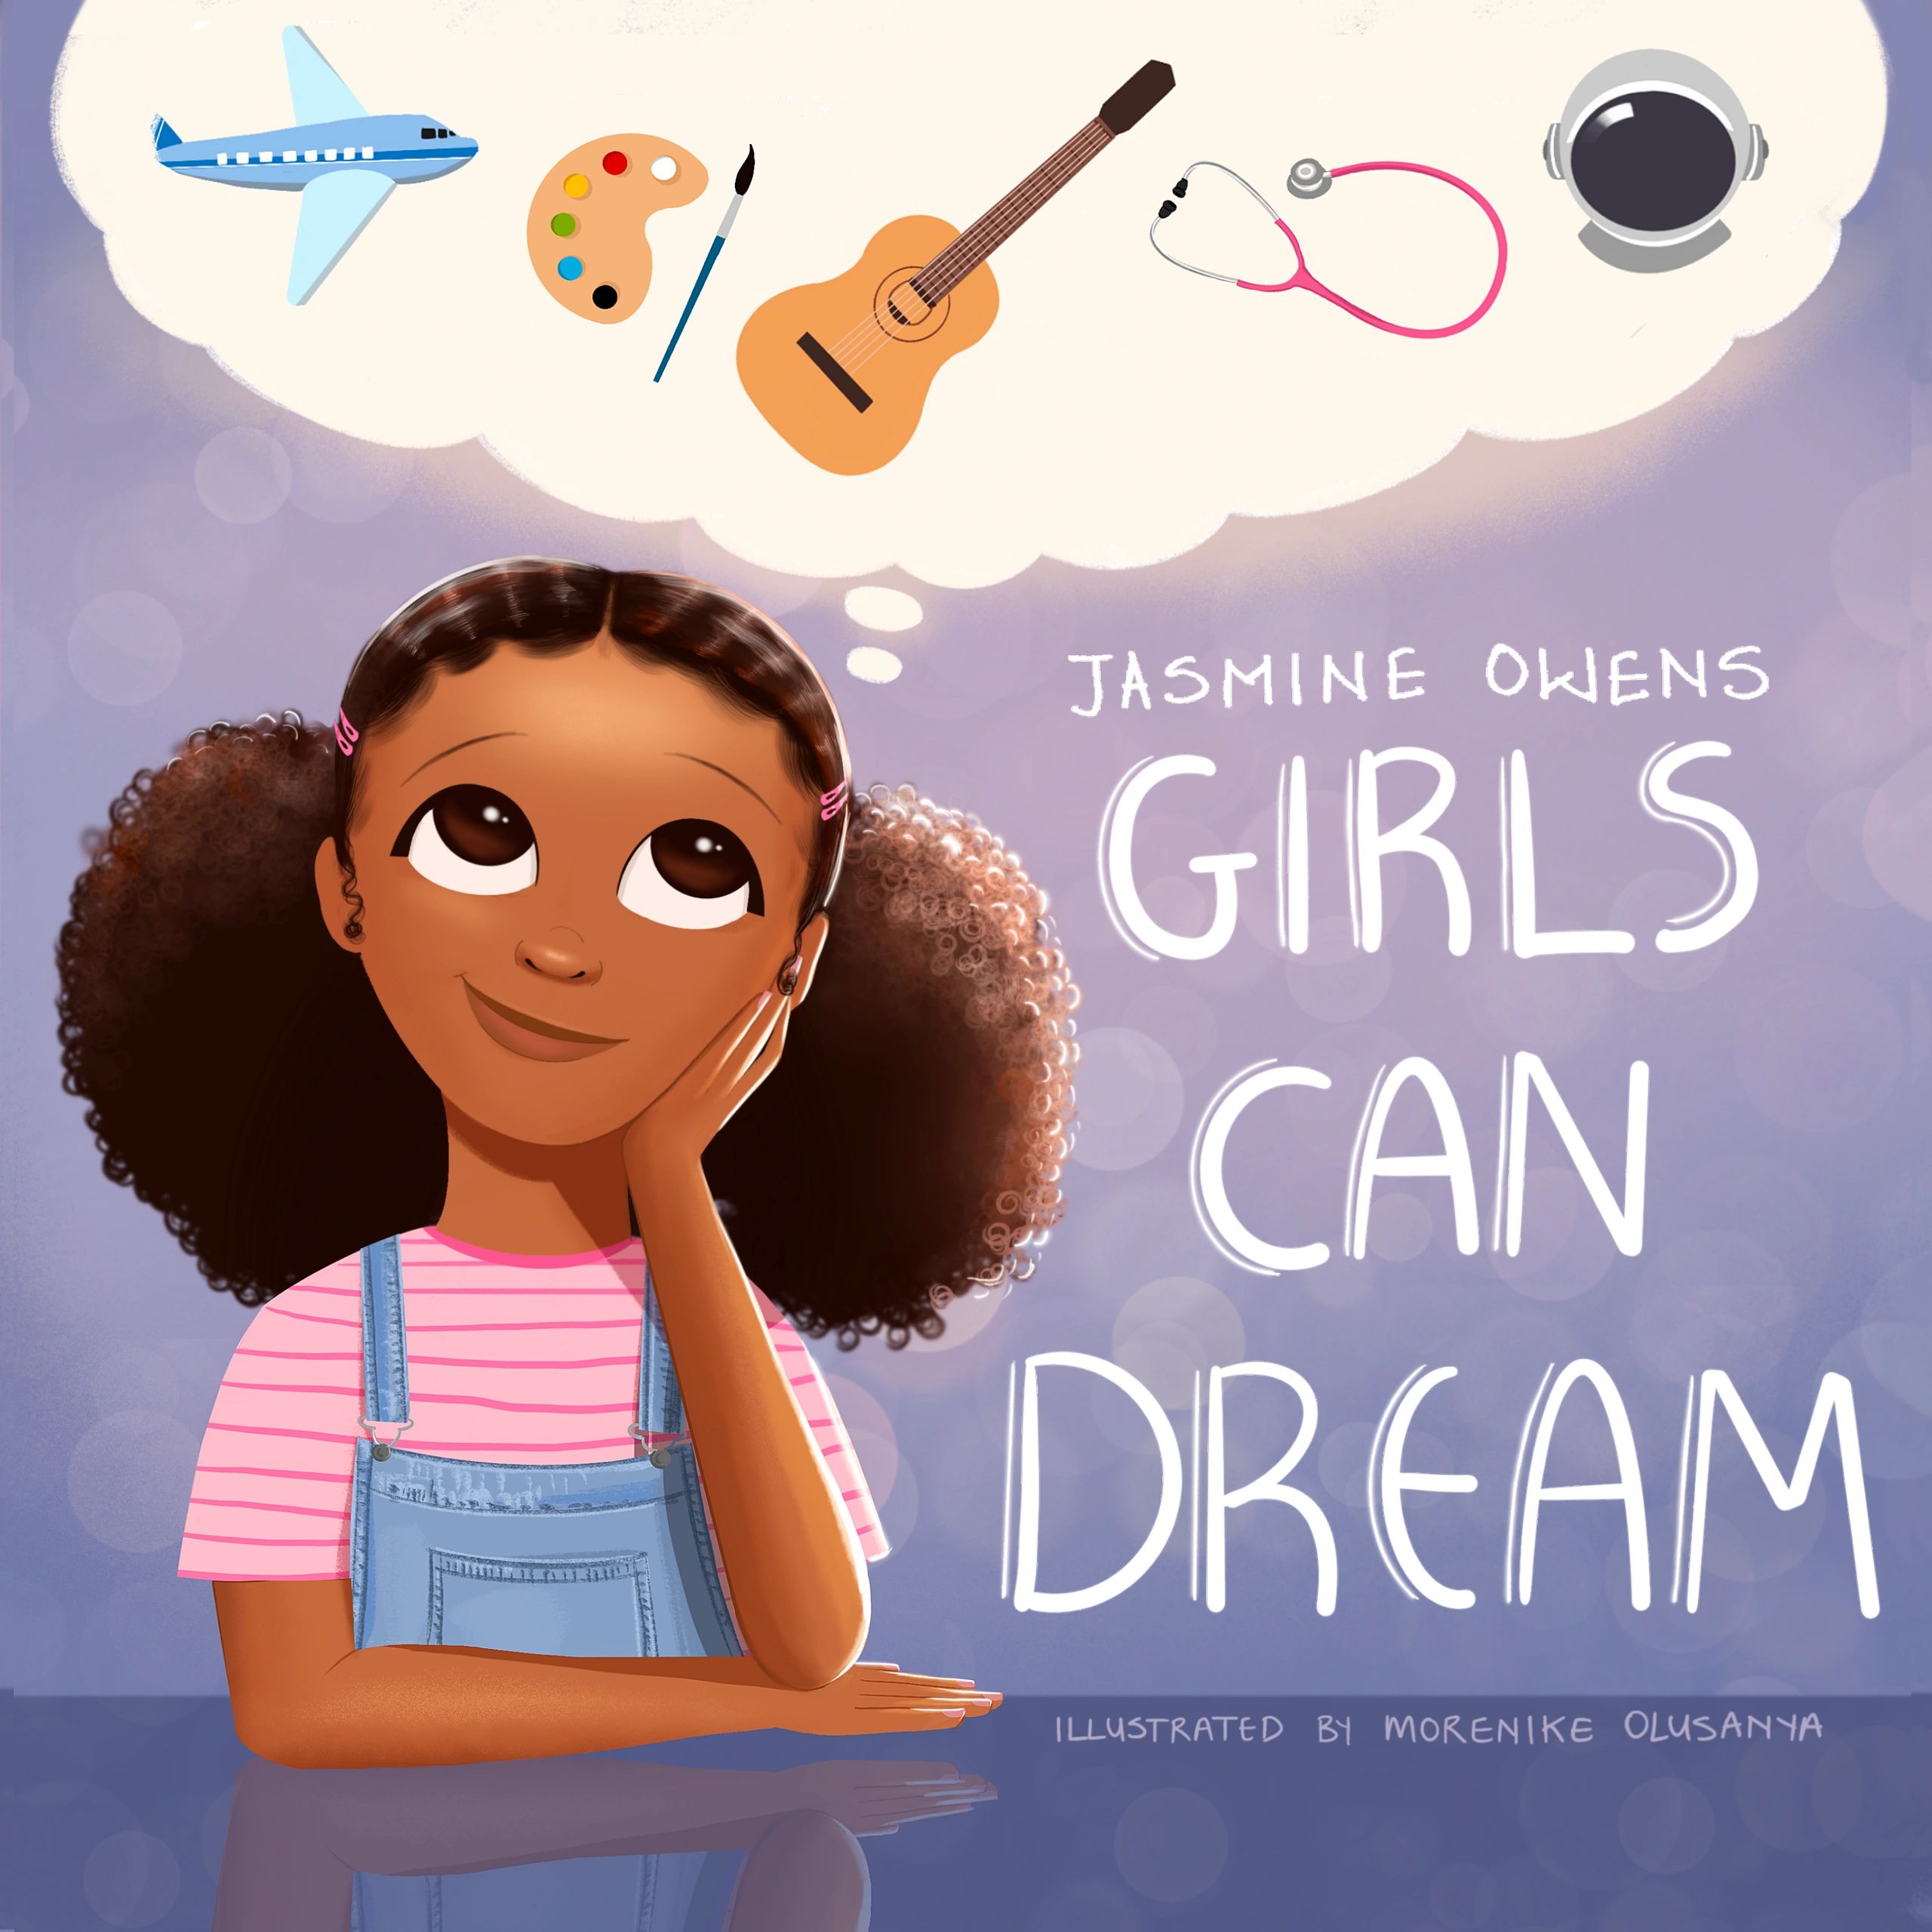 Cover of Girls Can Dream showing a young black girl imagining an airplane, paint brush, guitar, etc.